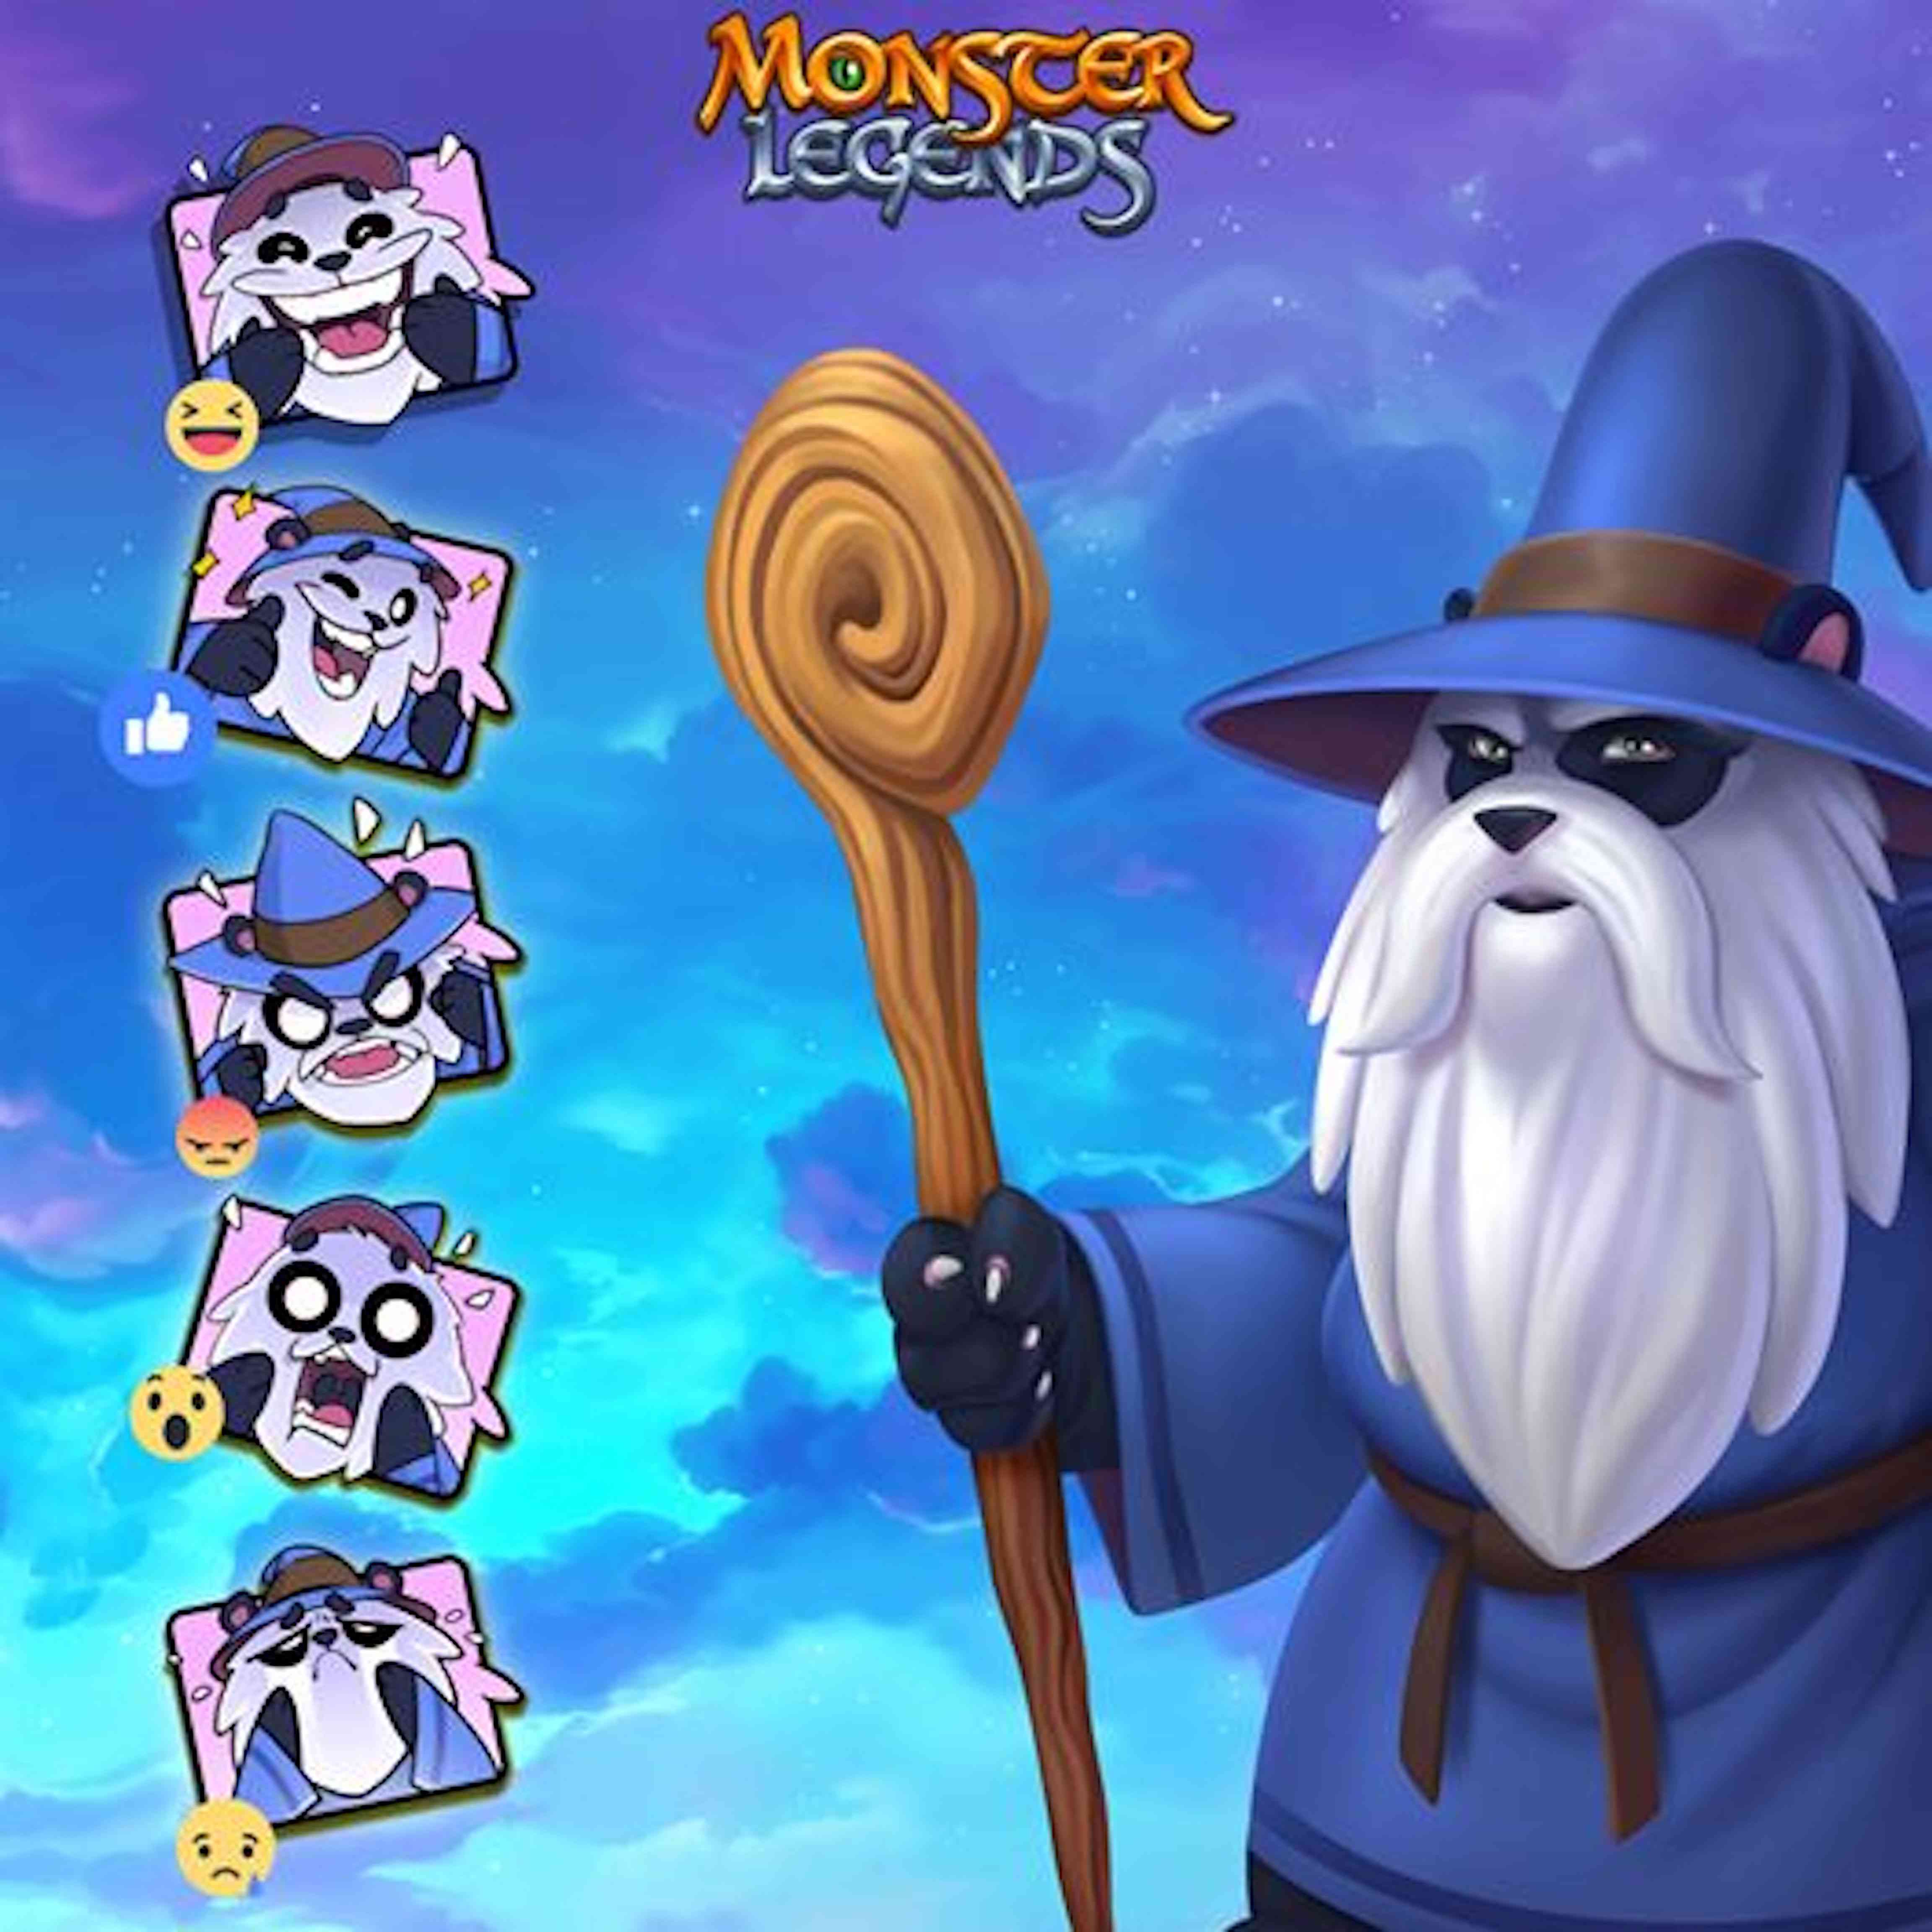 Pandalf the Monster Legends Guide